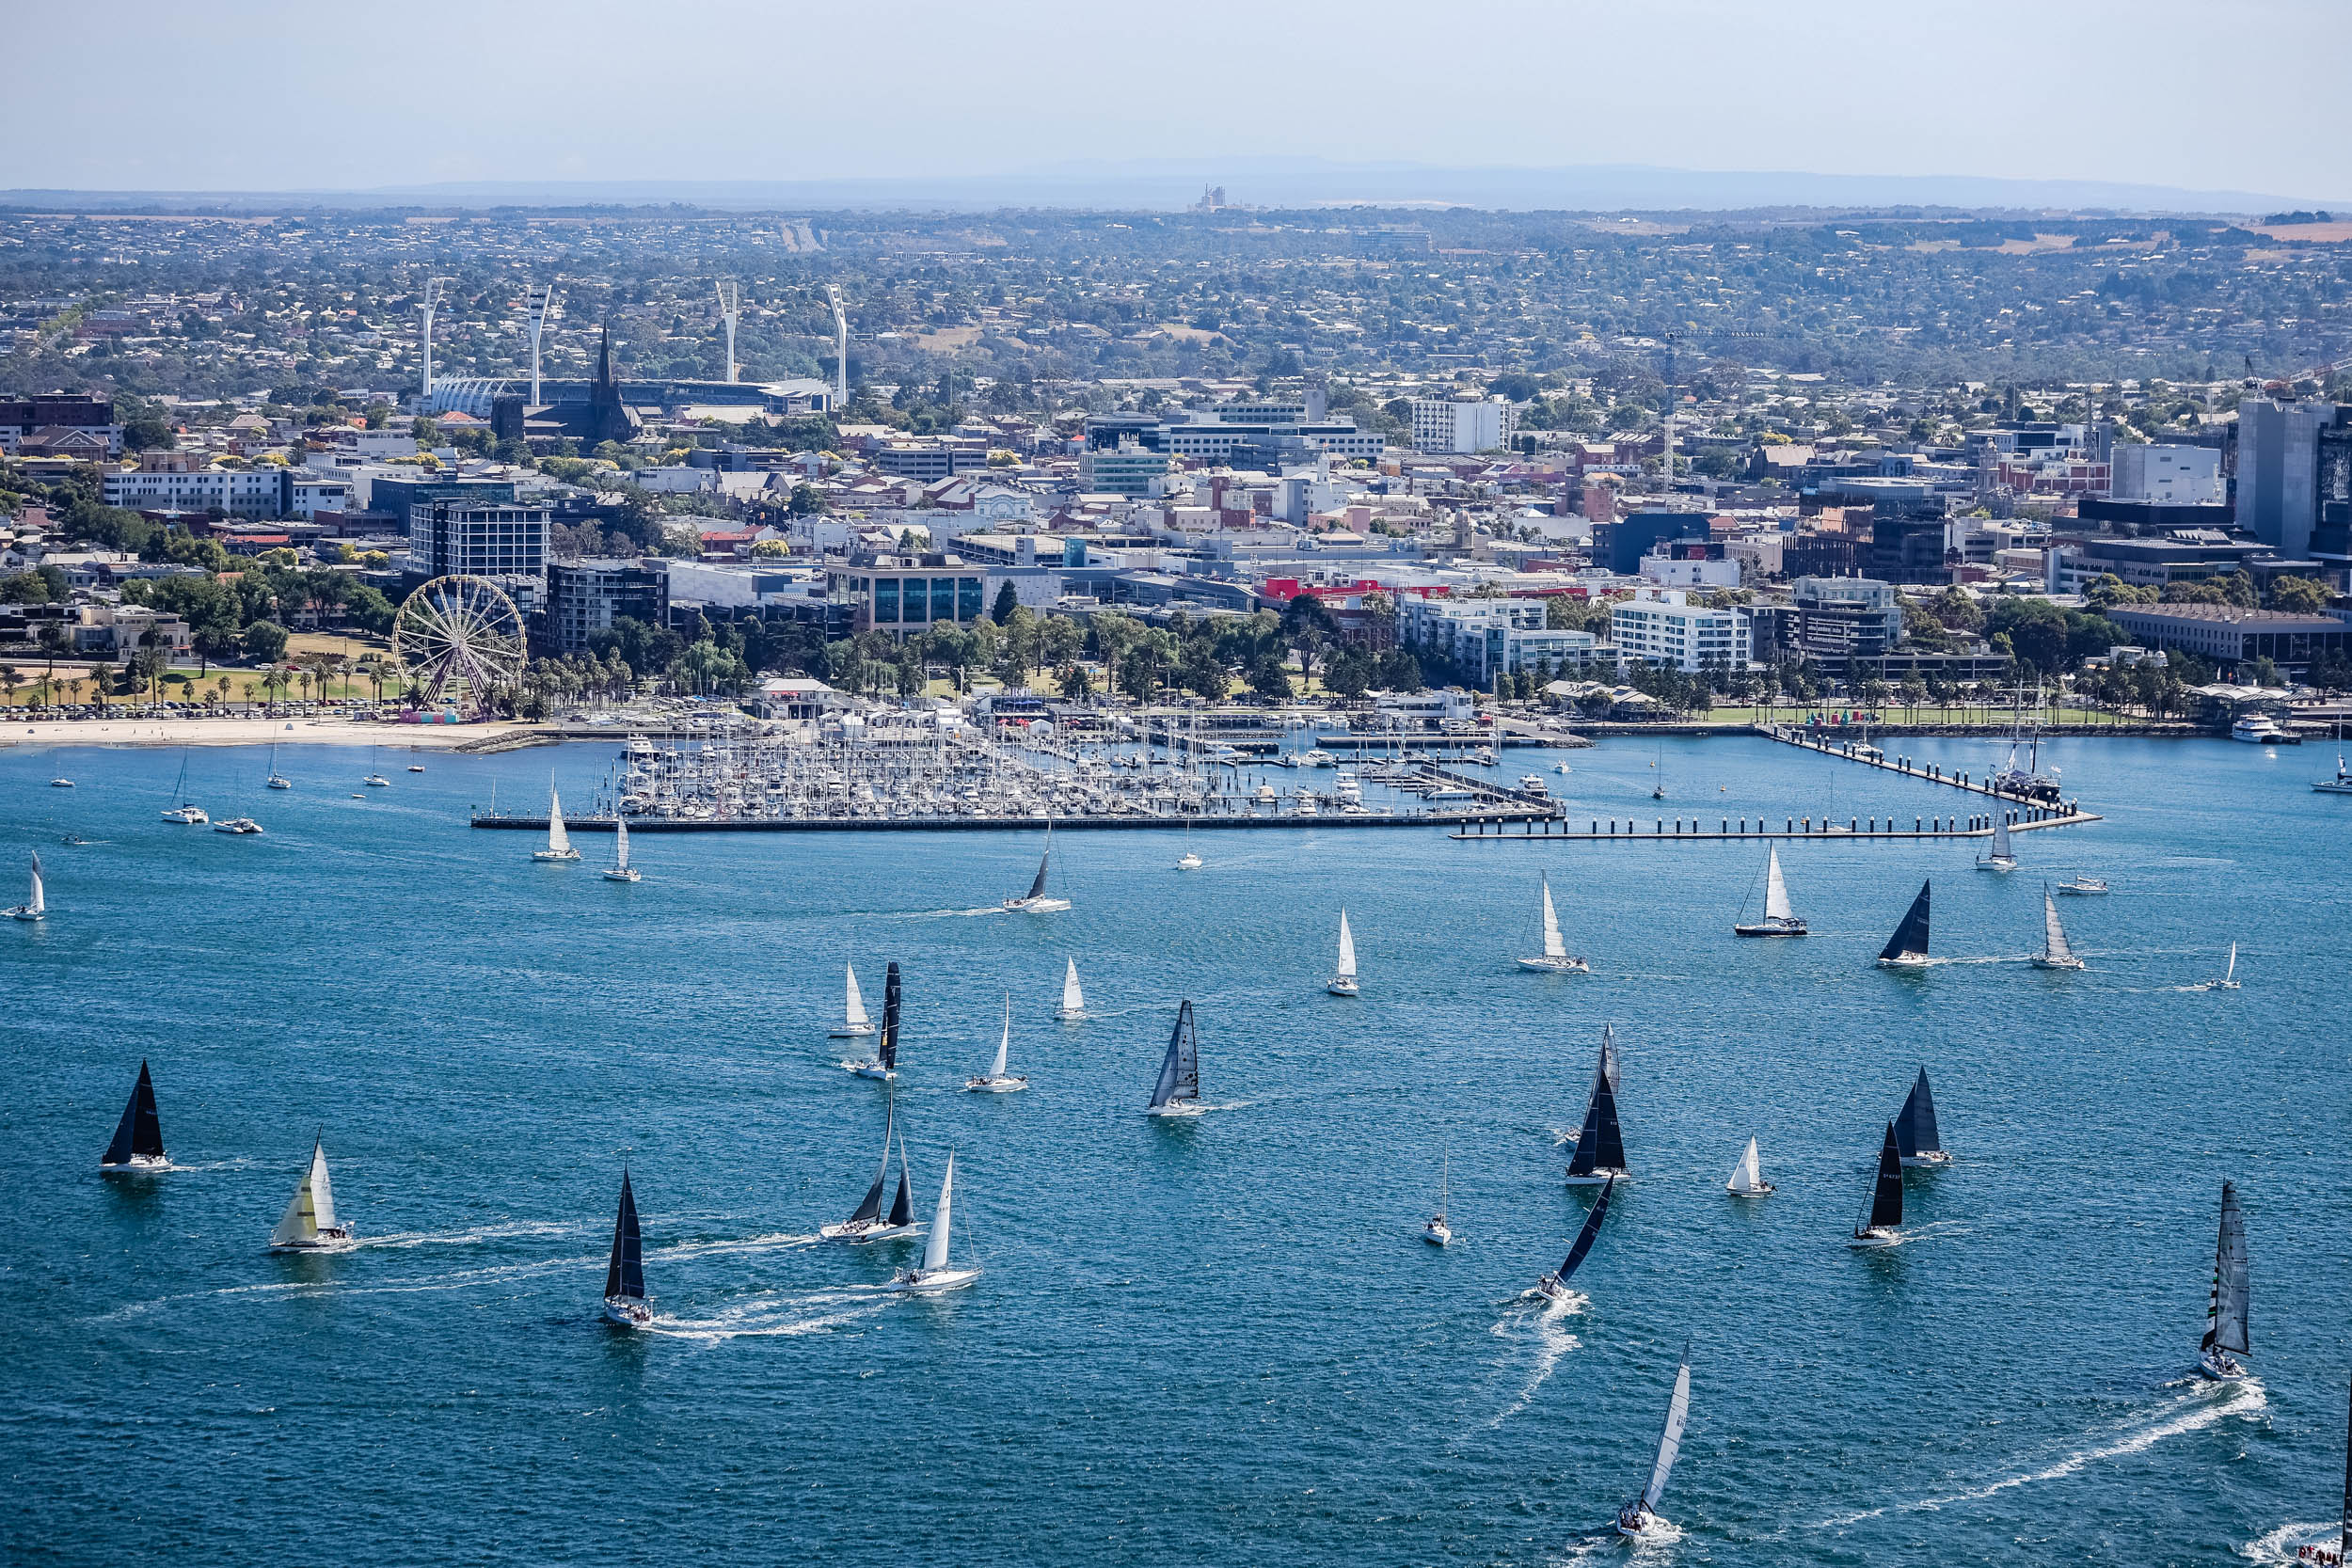 Boats sailing in Corio Bay in front of the Geelong Waterfront